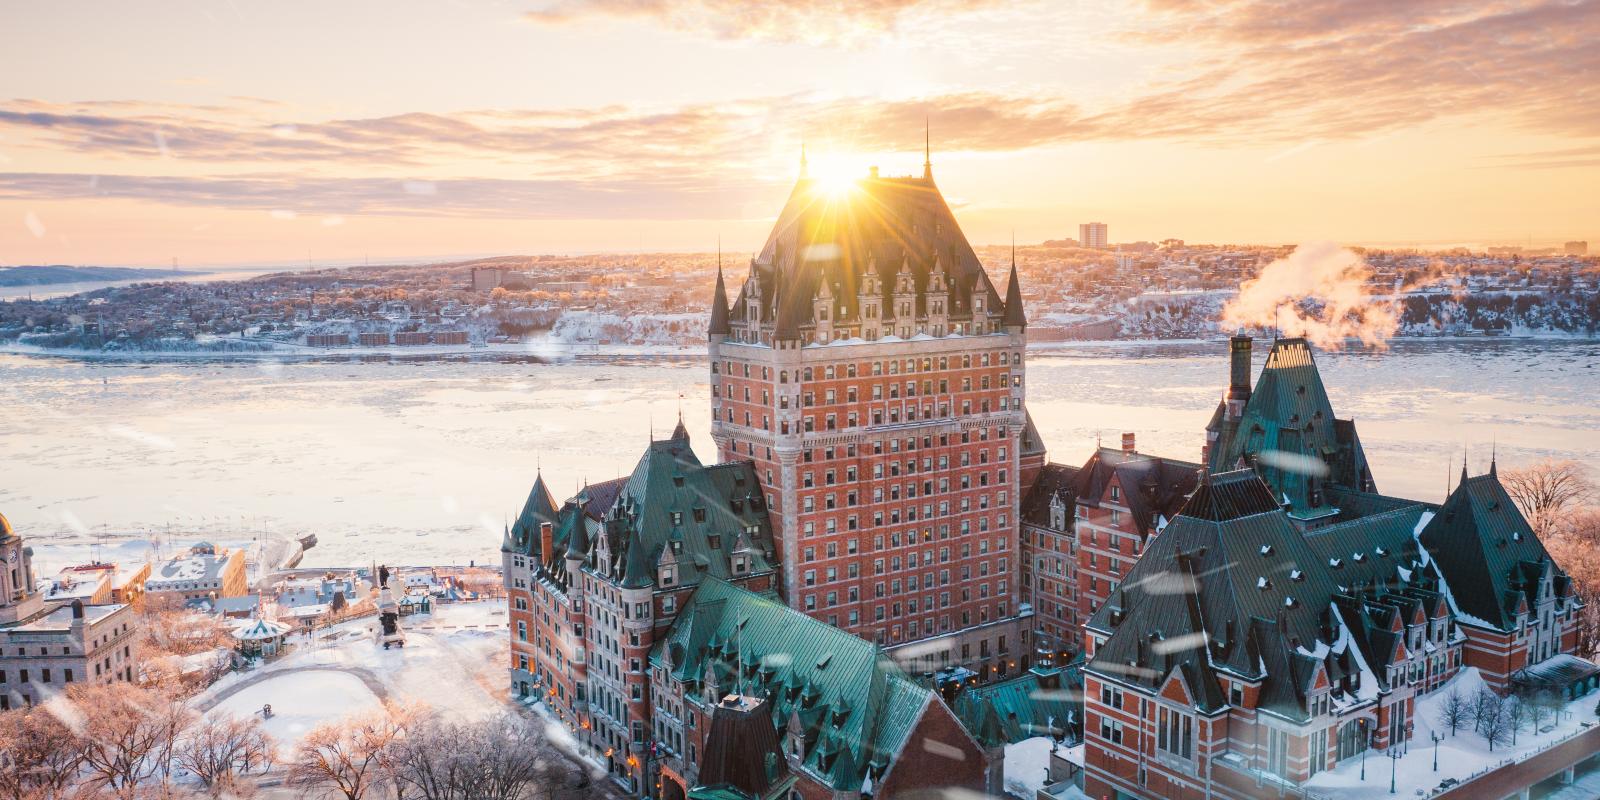 Fairmont Le Château Frontenac - Château Frontenac in winter with the river